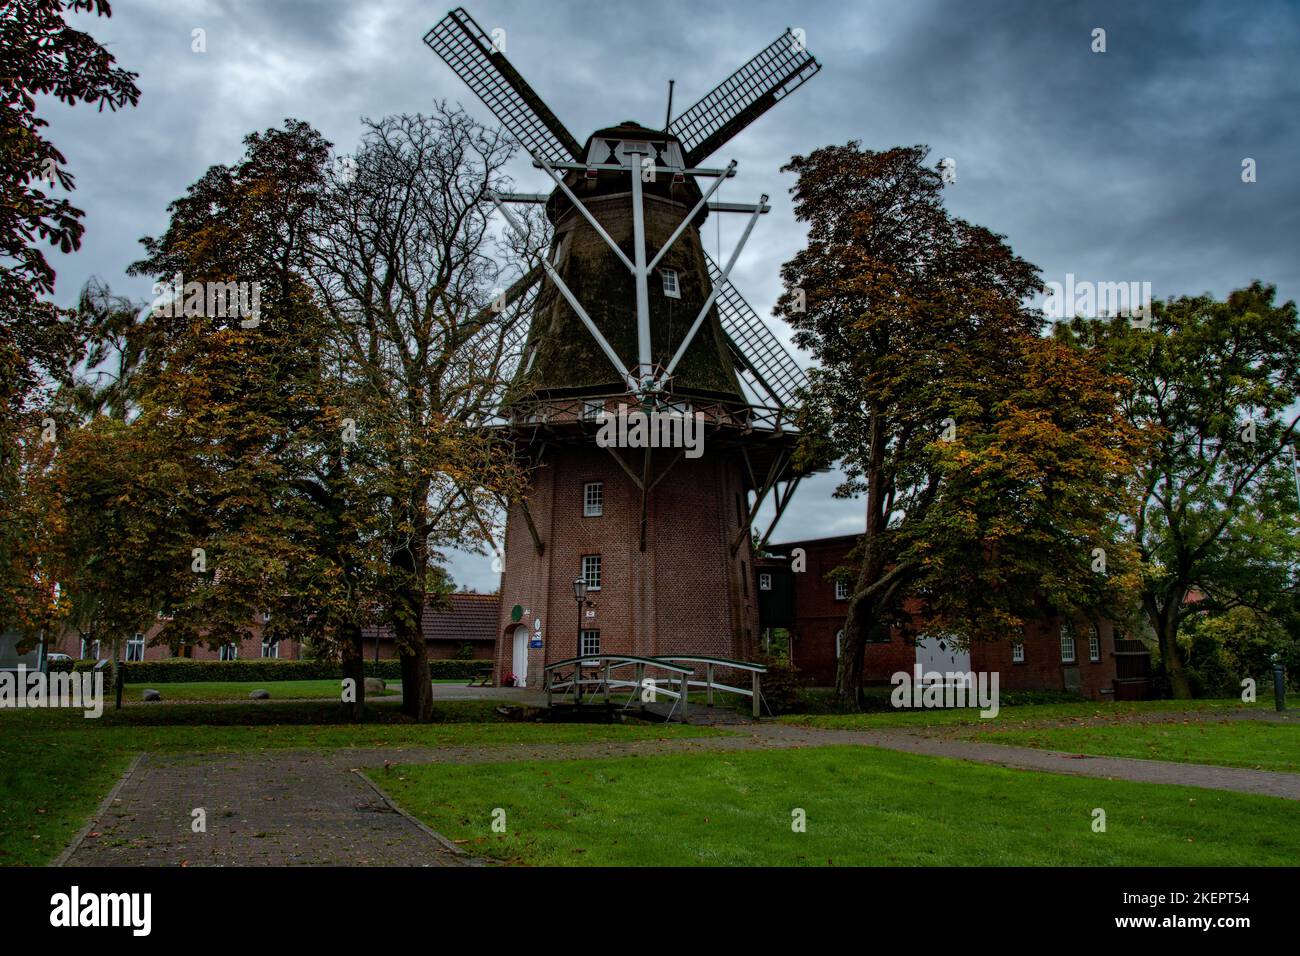 Three-storey gallery Dutchman, in a well-kept, romantic atmosphere. In front of the windmill is a small park-like area with a small white-painted wood Stock Photo